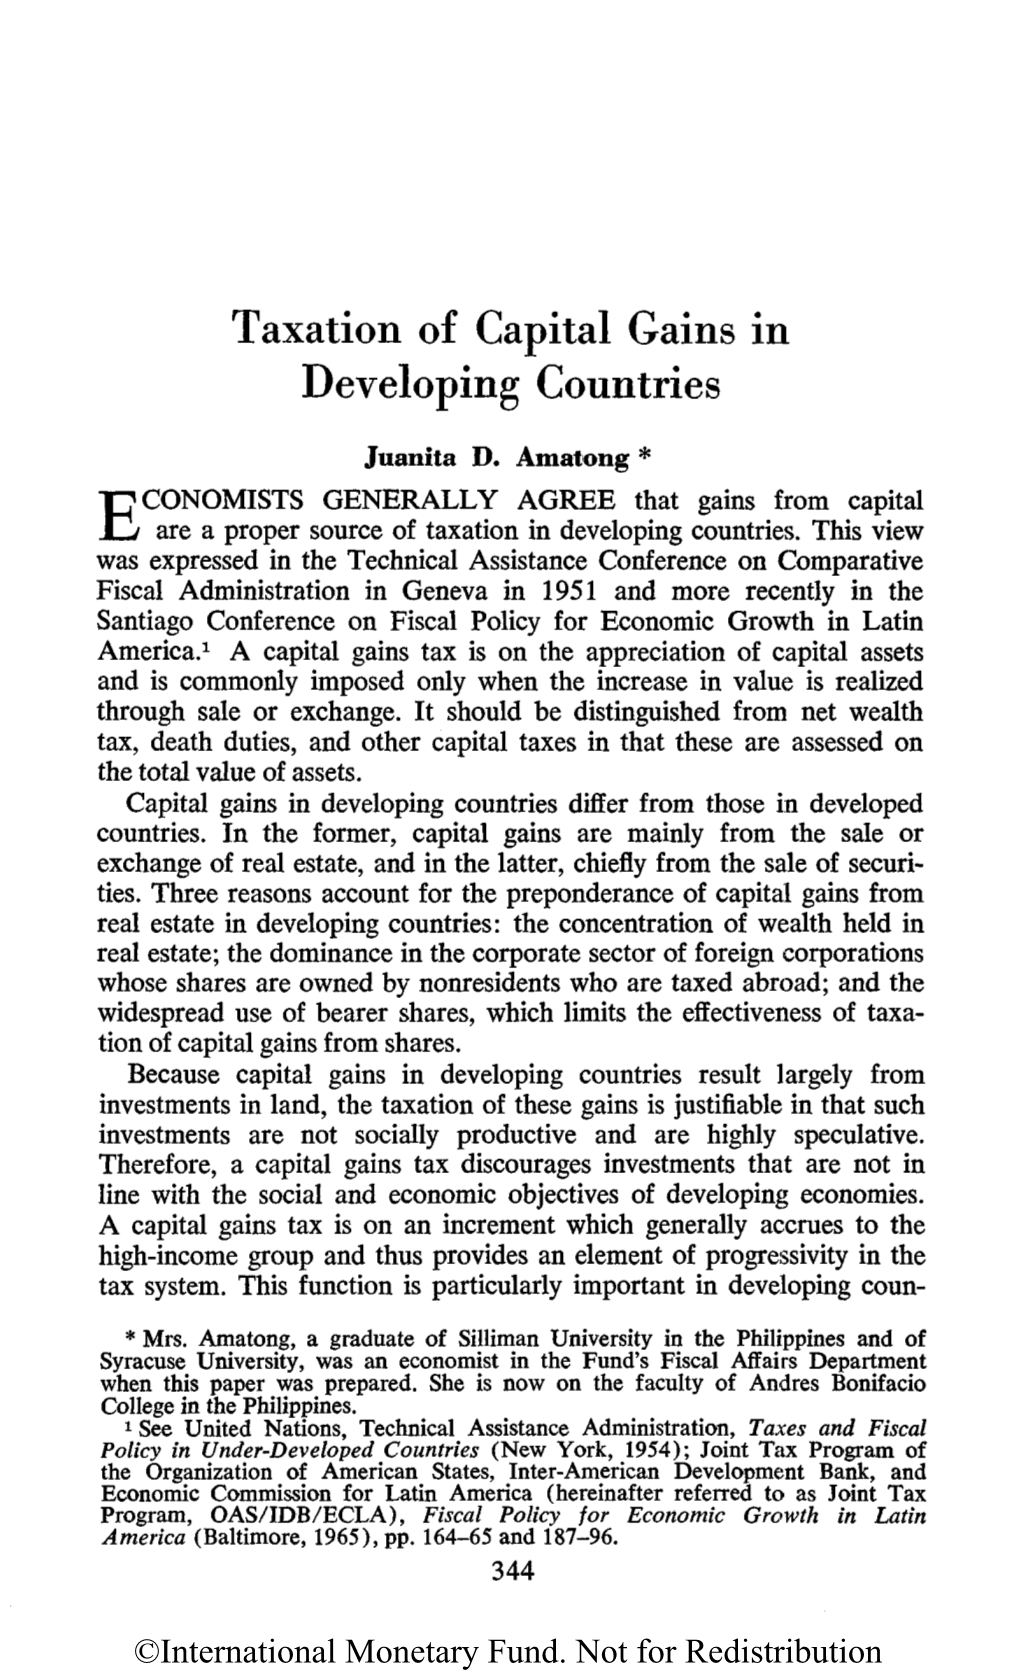 Taxation of Capital Gains in Developing Countries